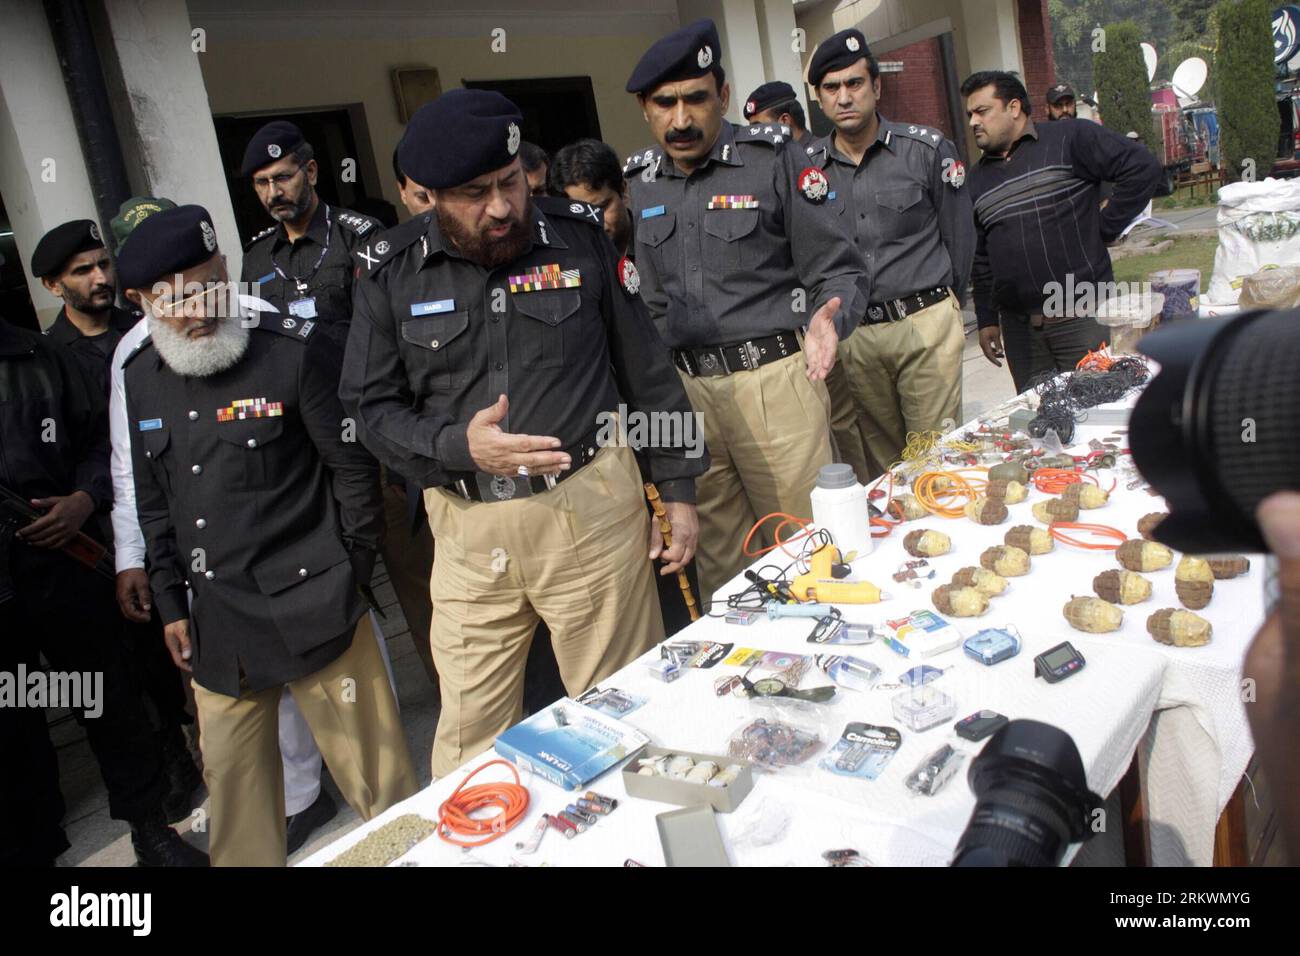 Bildnummer: 58711931  Datum: 16.11.2012  Copyright: imago/Xinhua (121116) -- LAHORE, Nov. 16, 2012 (Xinhua) -- Pakistani policemen display explosive materials to media at a news conference in Lahore, Pakistan, Nov. 16, 2012. An intelligence agency in a joint operation with police seized heavy quantity of weapons and ammunitions and arrested 12 suspected terrorists from different areas of Gujrat district in eastern Punjab province, local media reported. (Xinhua/Jamil Ahmed) PAKISTAN-UNREST-POLICE-TERROR-SEIZURE PUBLICATIONxNOTxINxCHN Gesellschaft Sicherheit Polizei Waffen Munition x0x xds 2012 Stock Photo